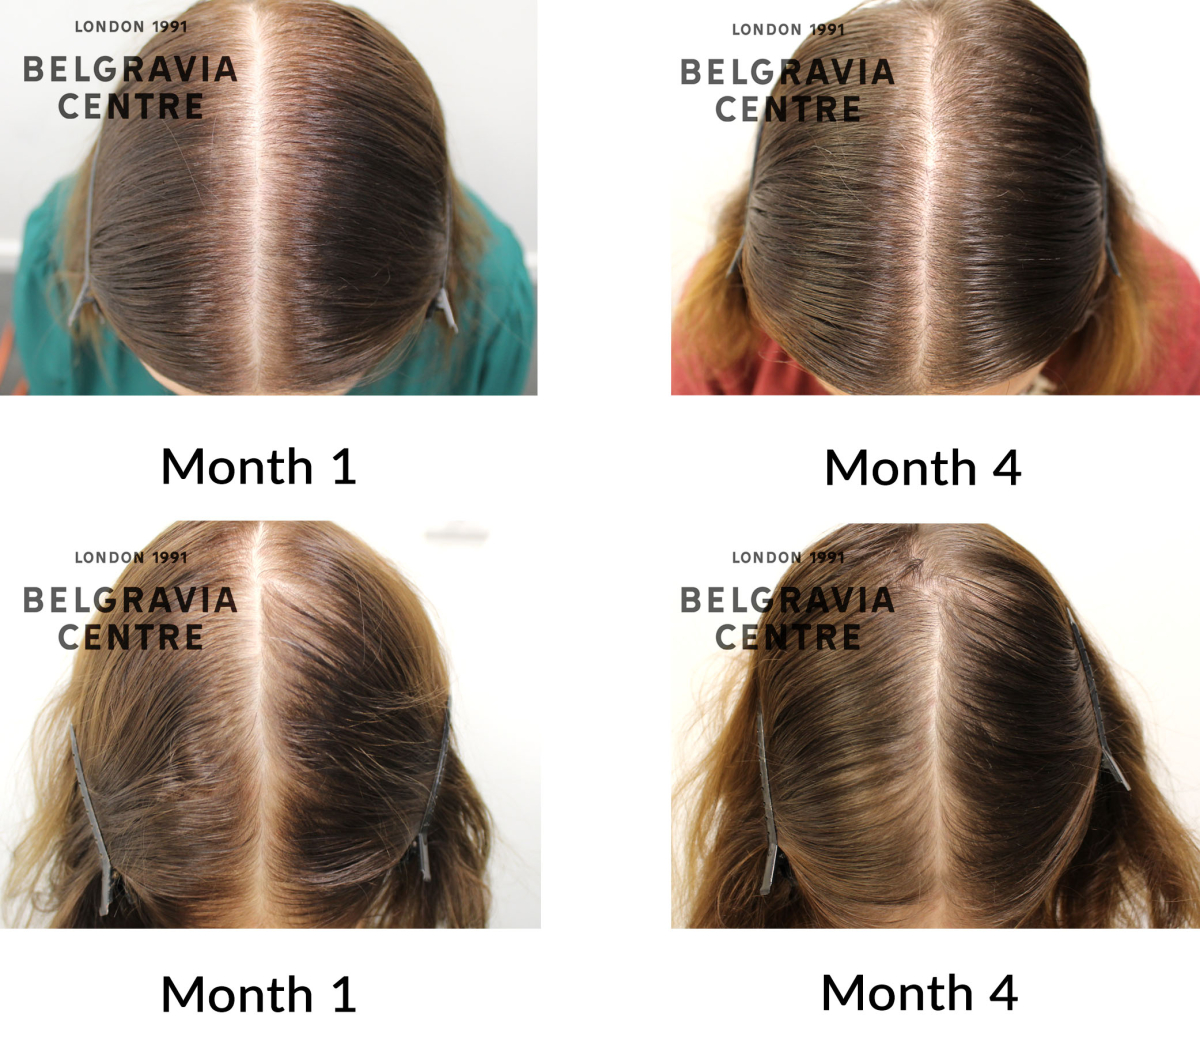 female pattern hair loss and diffuse hair loss the belgravia centre 460563